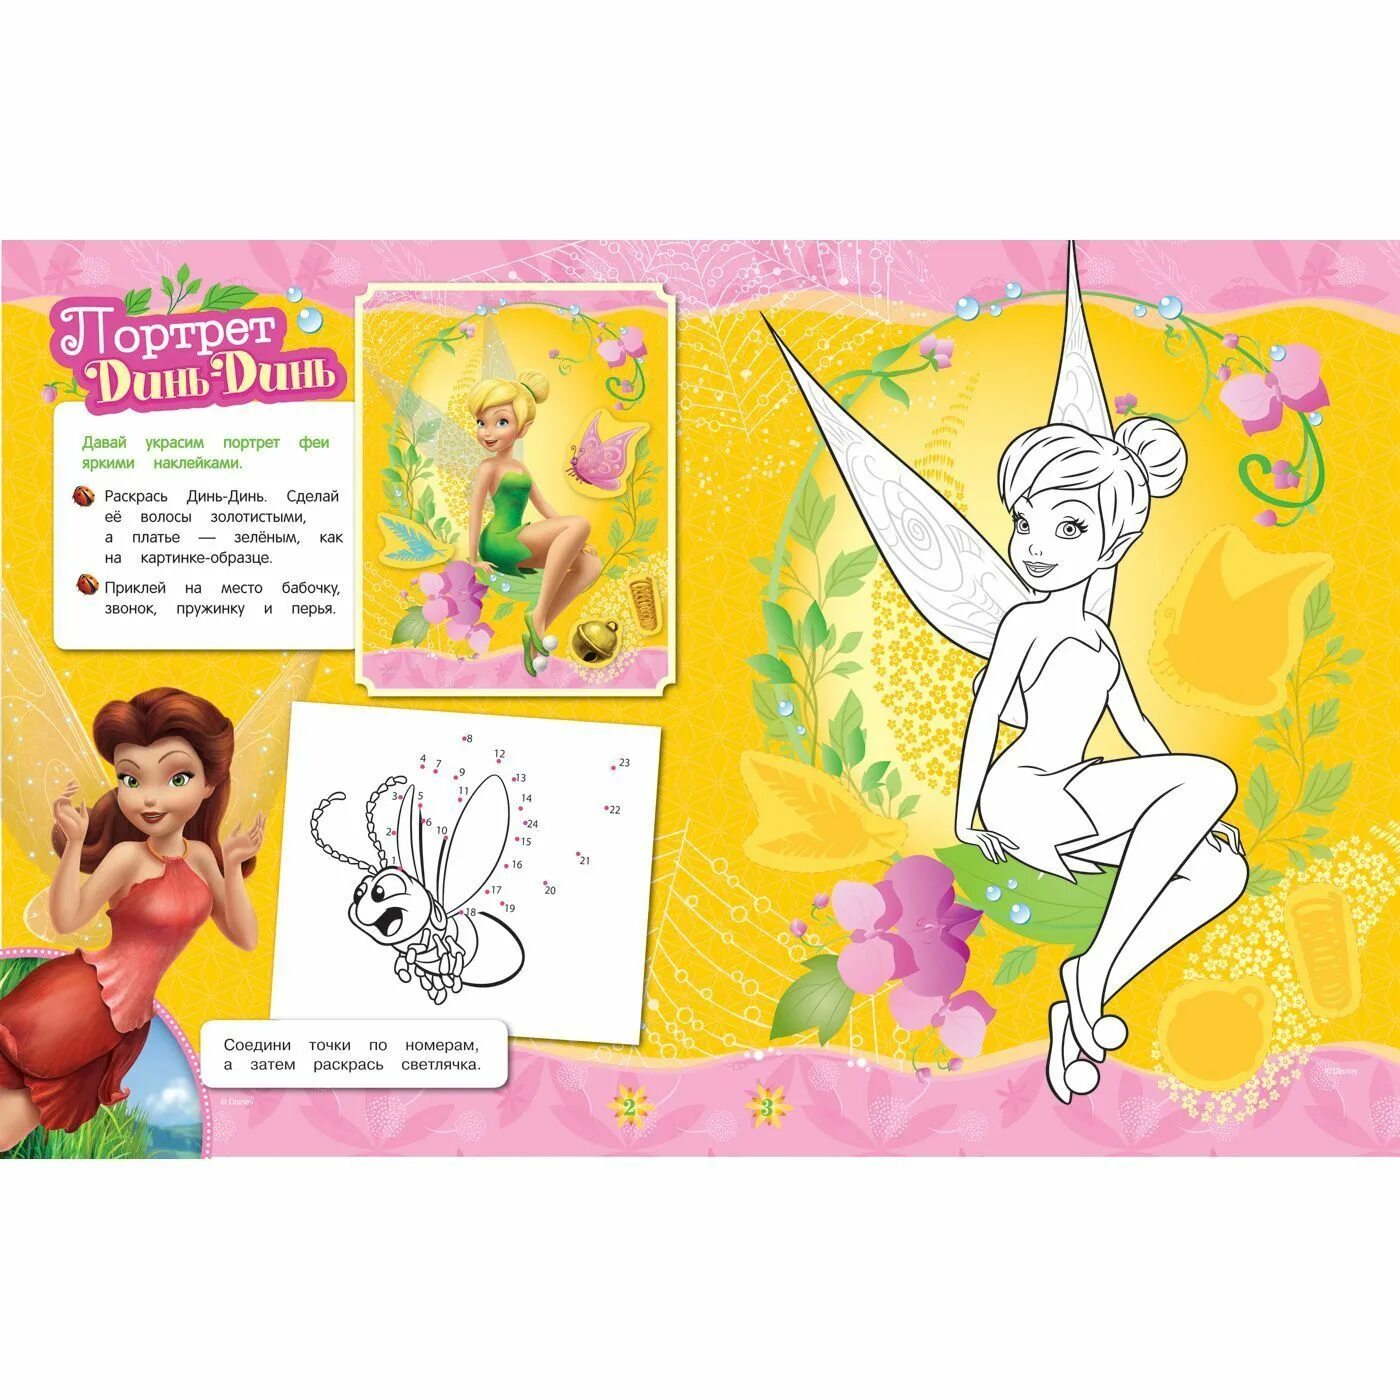 Disney fairies with stickers #5